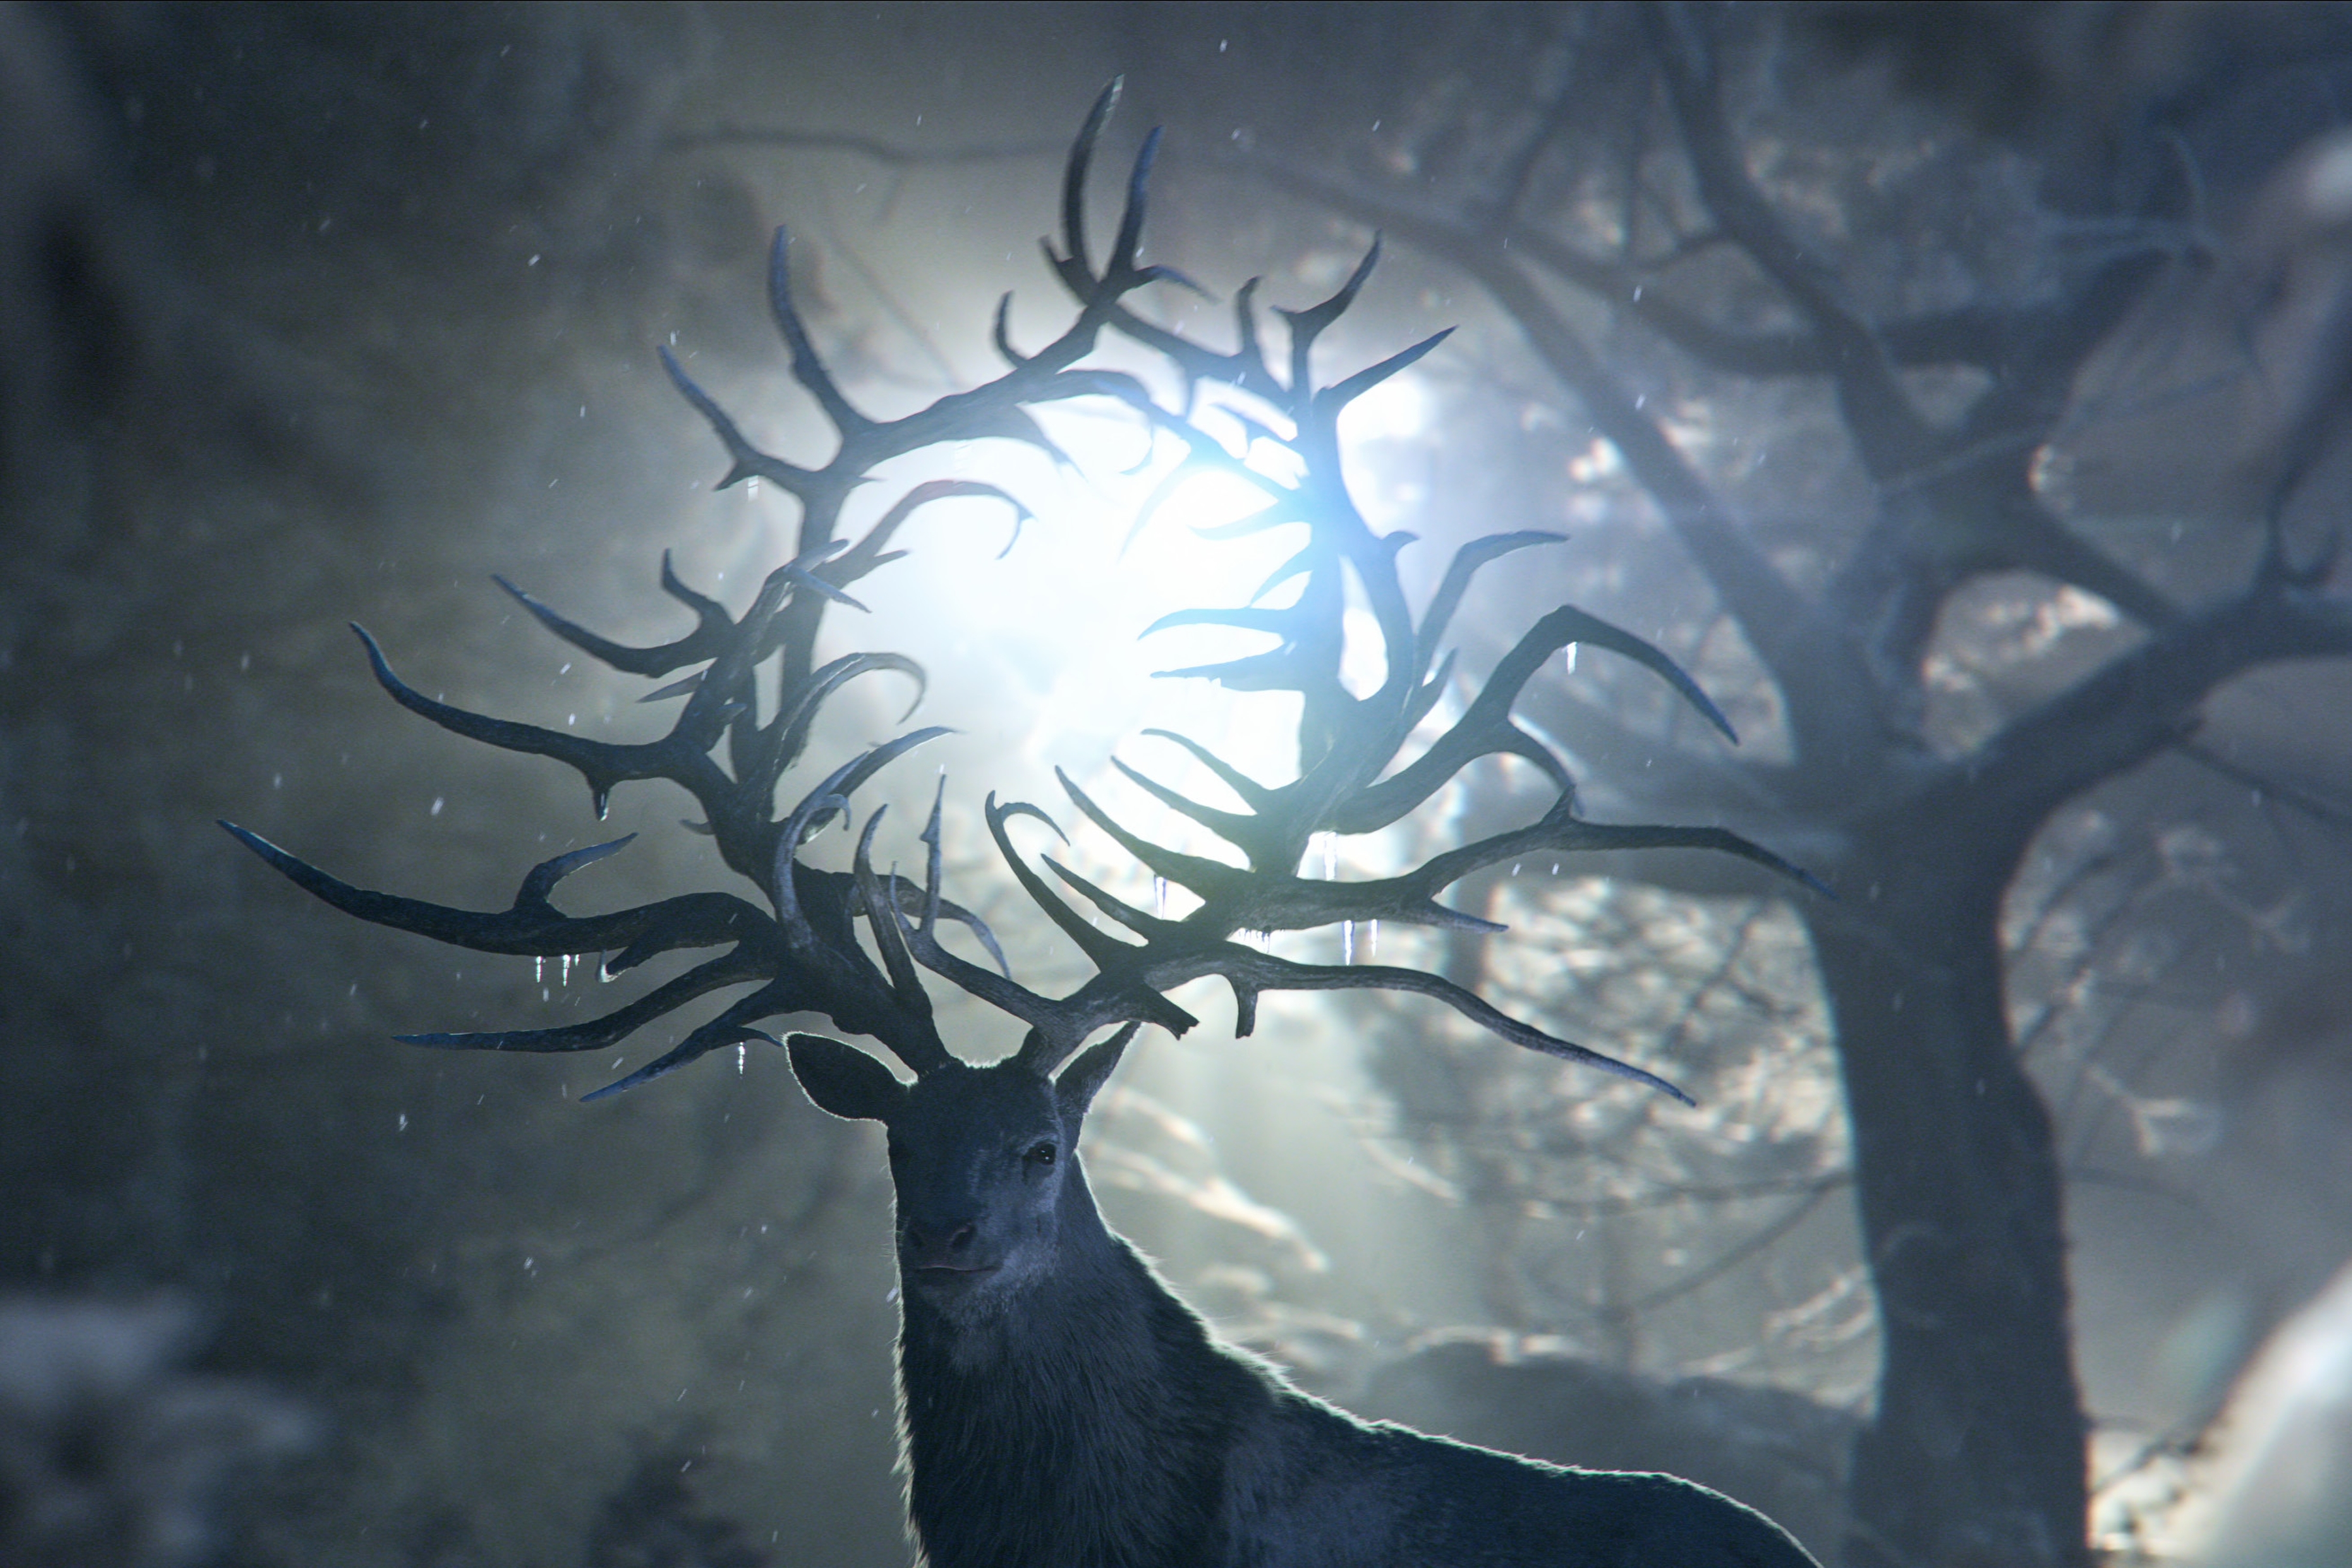 A stag with elaborate antlers in front of trees and an eerie glow.